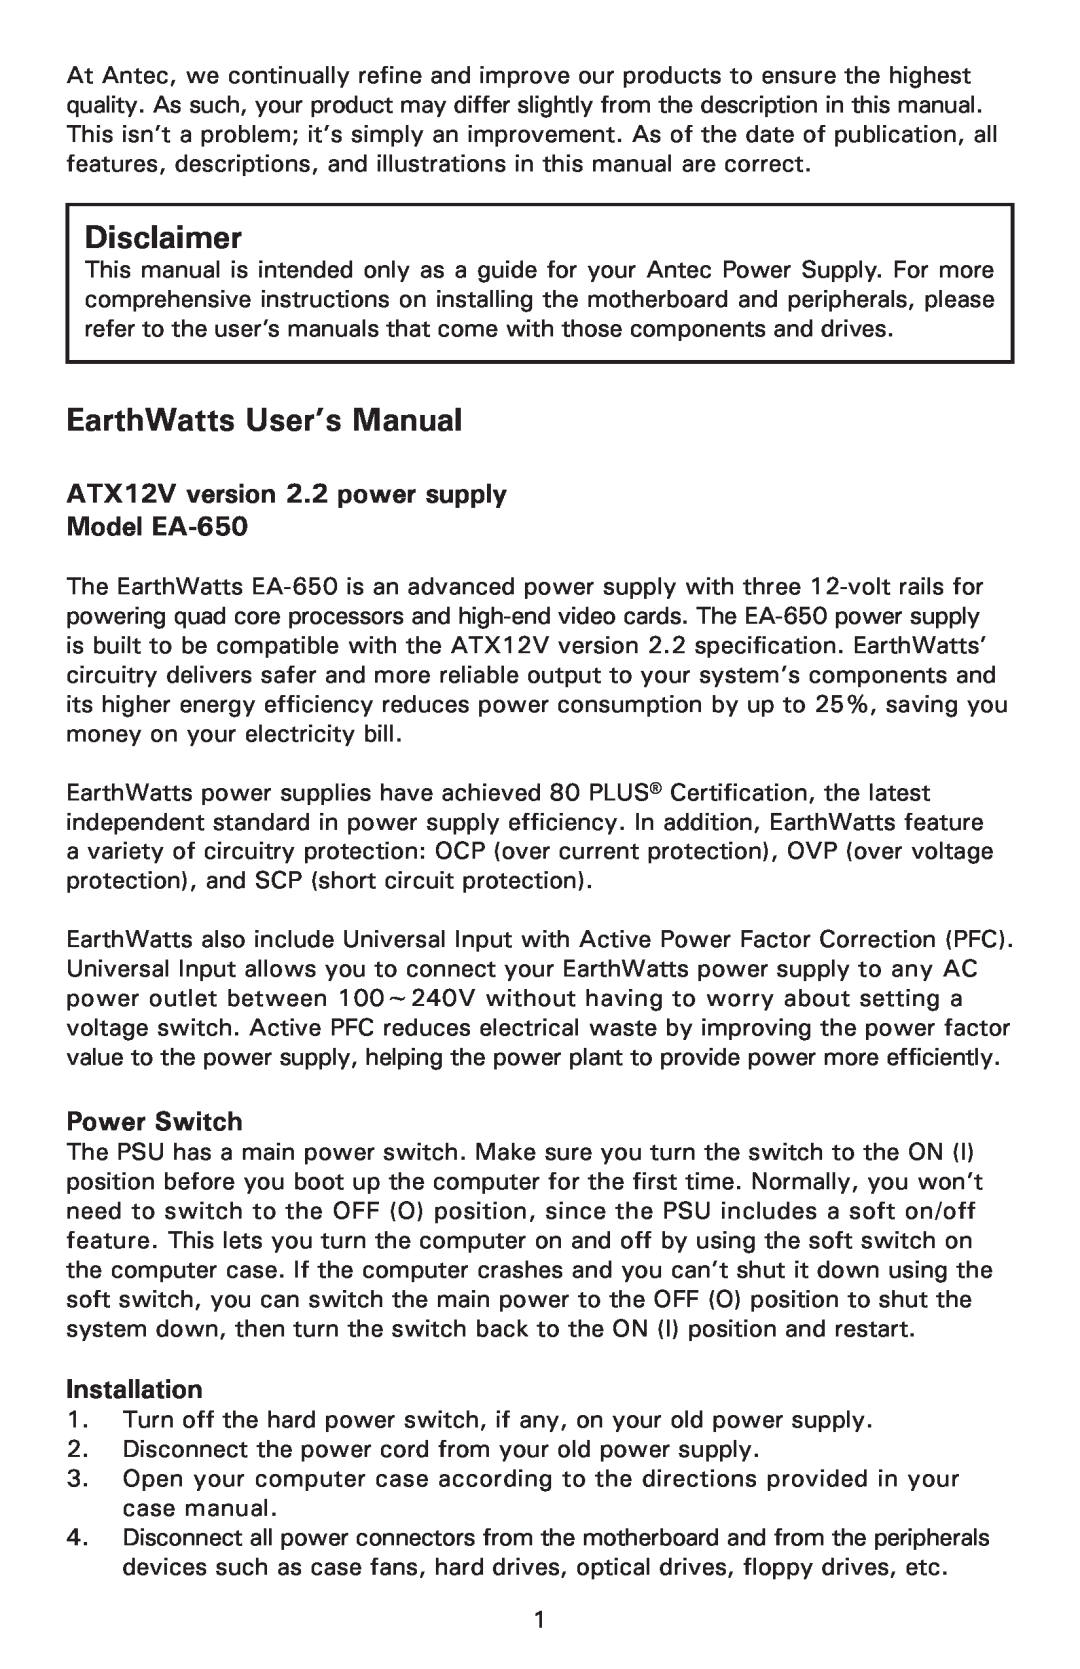 Antec ATX12V version 2.2 power supply Model EA-650, Power Switch, Installation, Disclaimer, EarthWatts User’s Manual 